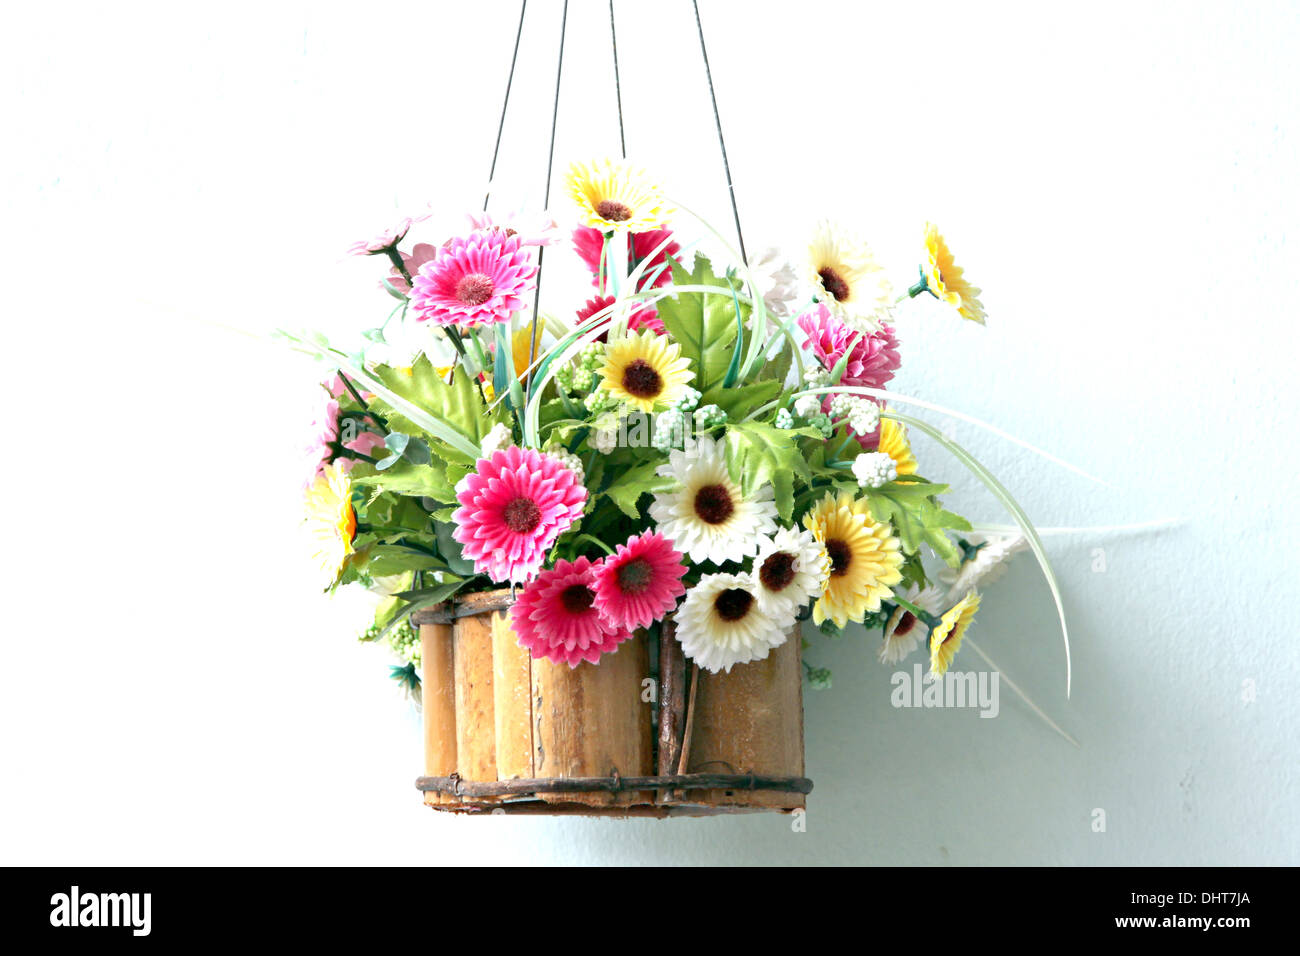 Colorful flowers in a wooden basket and it was hanging out. Stock Photo